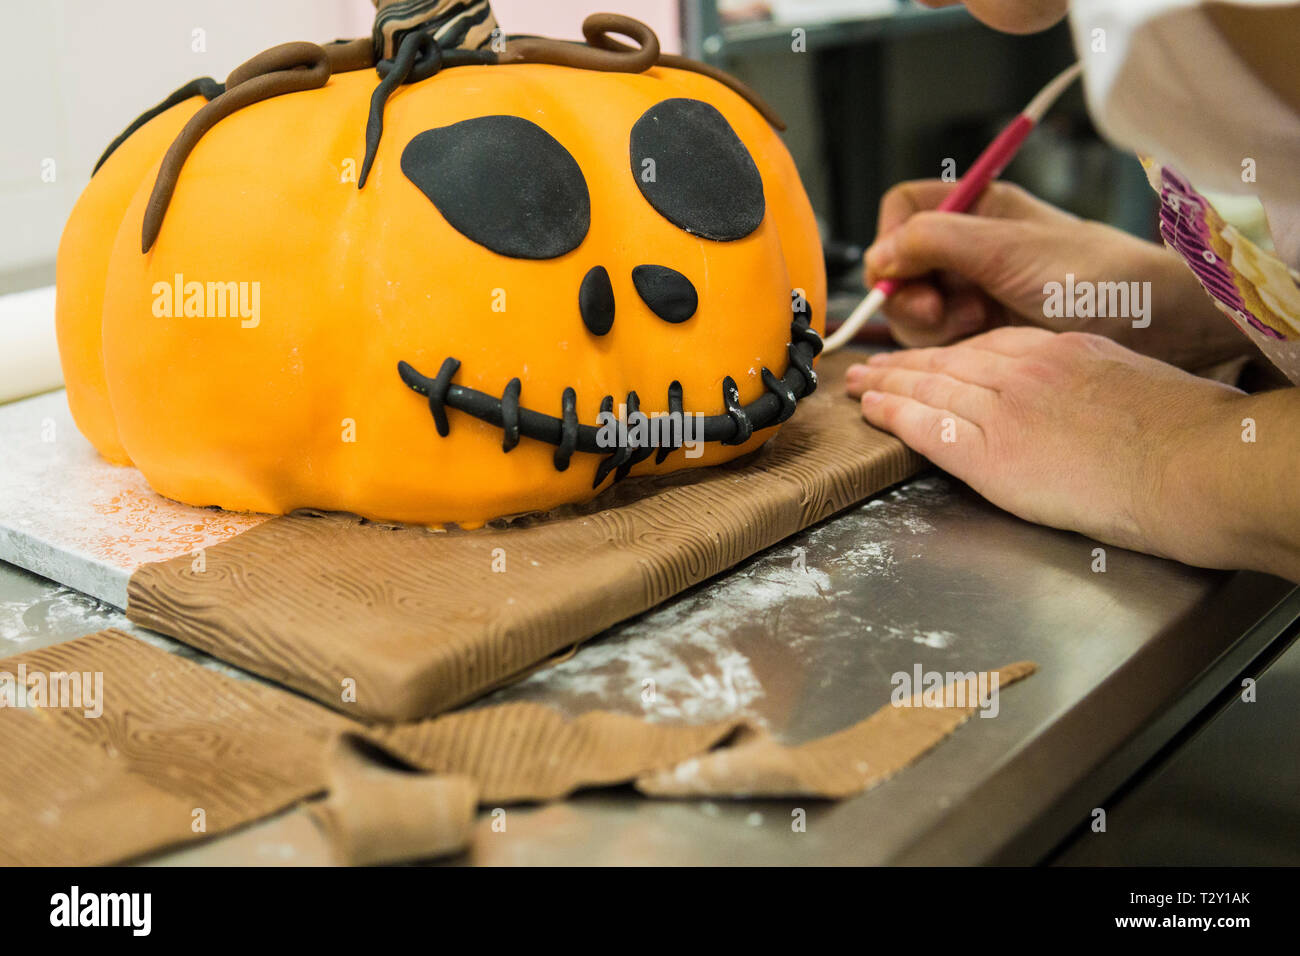 pastry chef is molding a cake with pumpkin shape Stock Photo